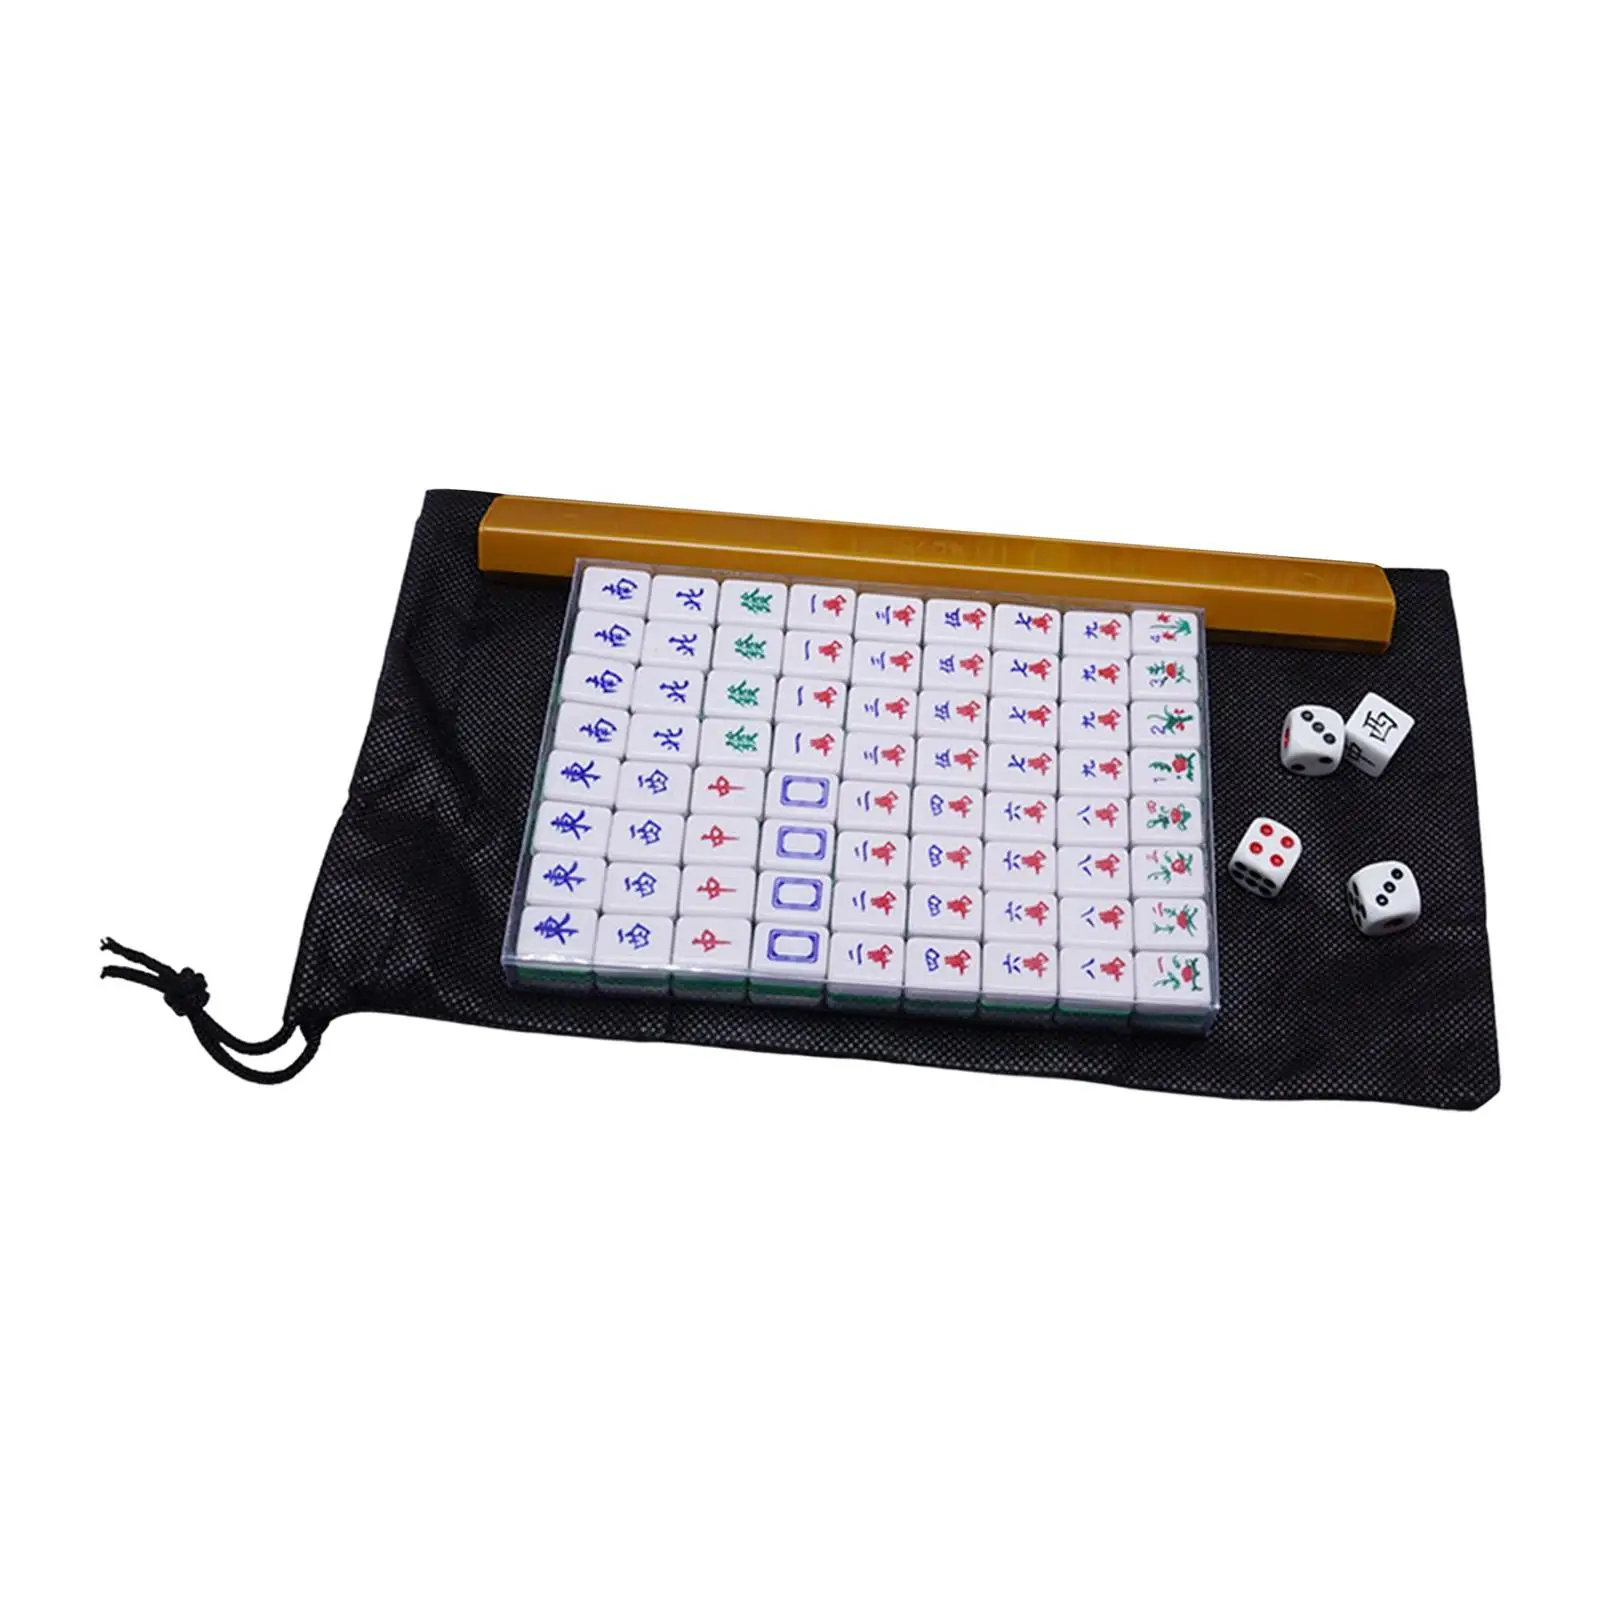 Traditional Chinese Mahjong Game Set Friends Leisure Tile Tiles Games Board Game for Chinese Game Play Party Home